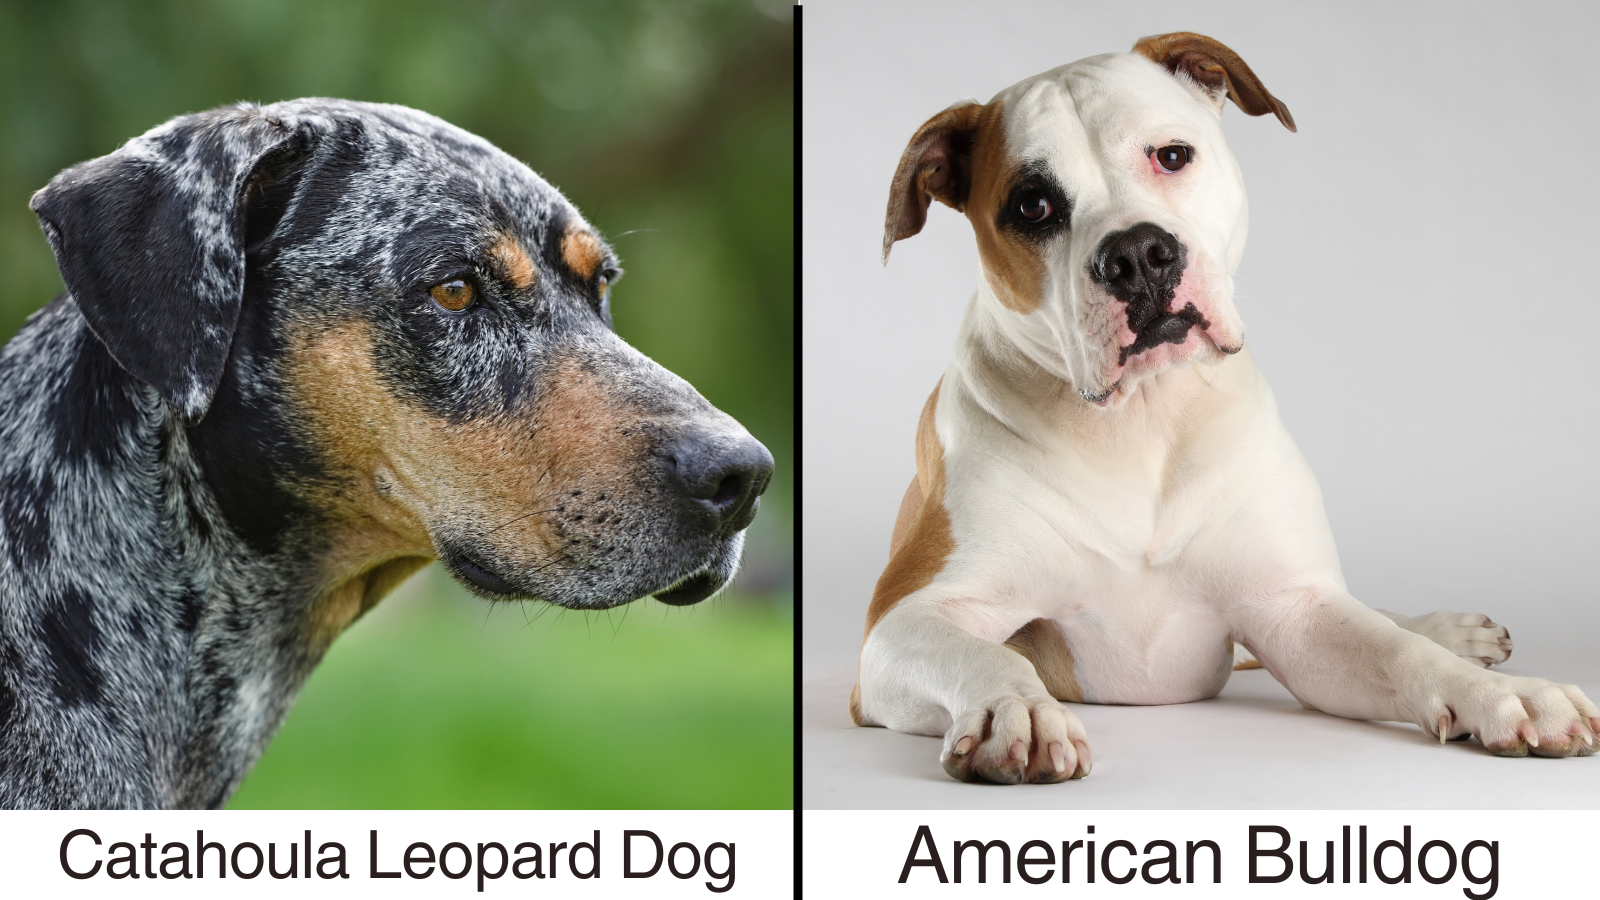 A Photo Collage of the Catahoula Leopard Dog and the American Bulldog